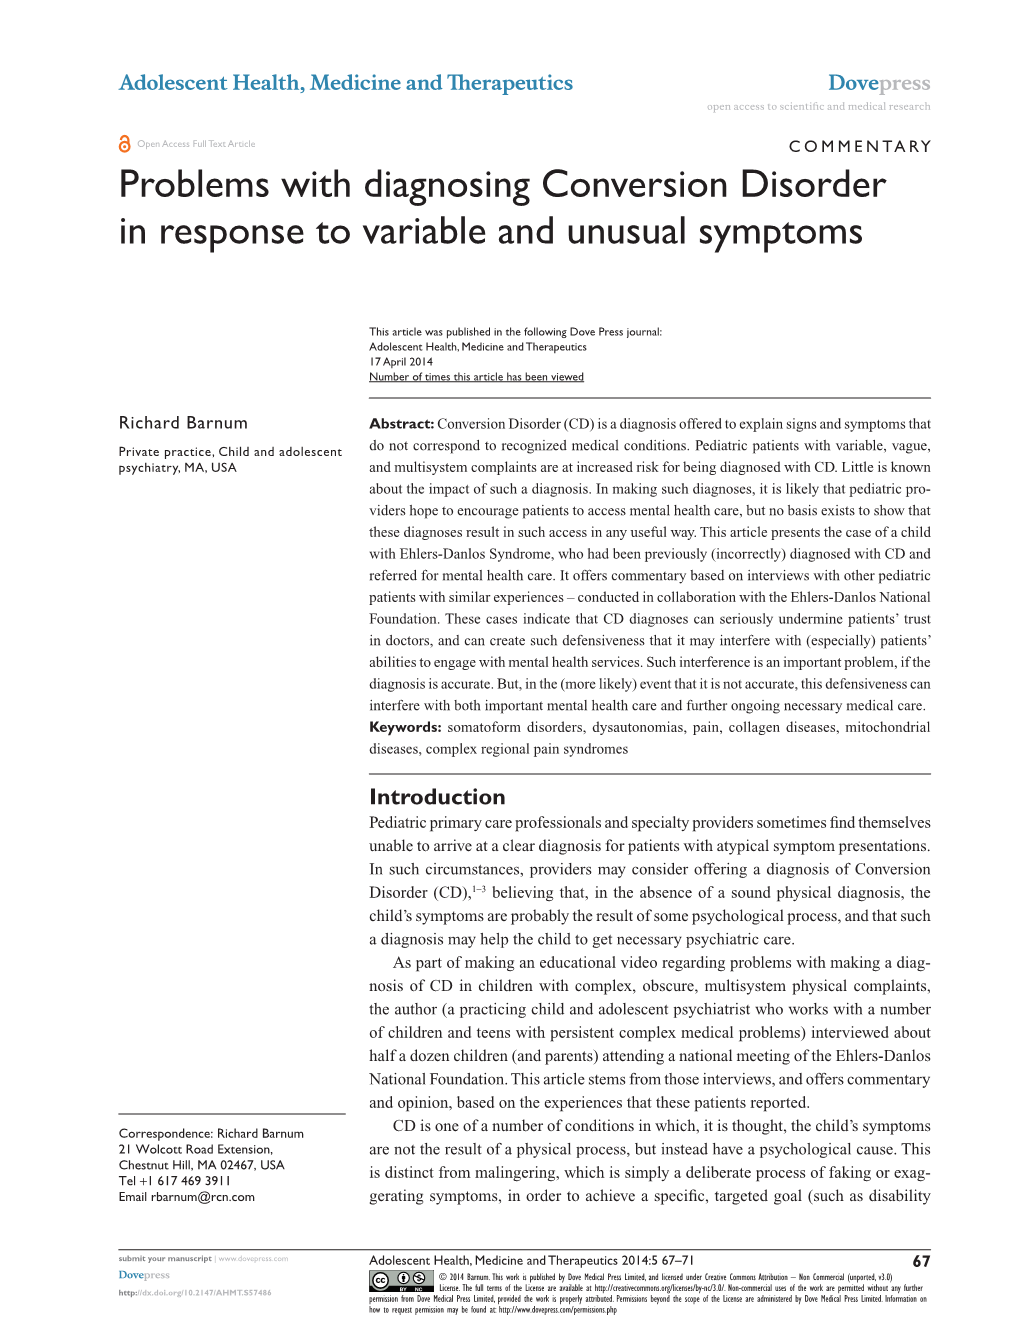 Problems with Diagnosing Conversion Disorder in Response to Variable and Unusual Symptoms